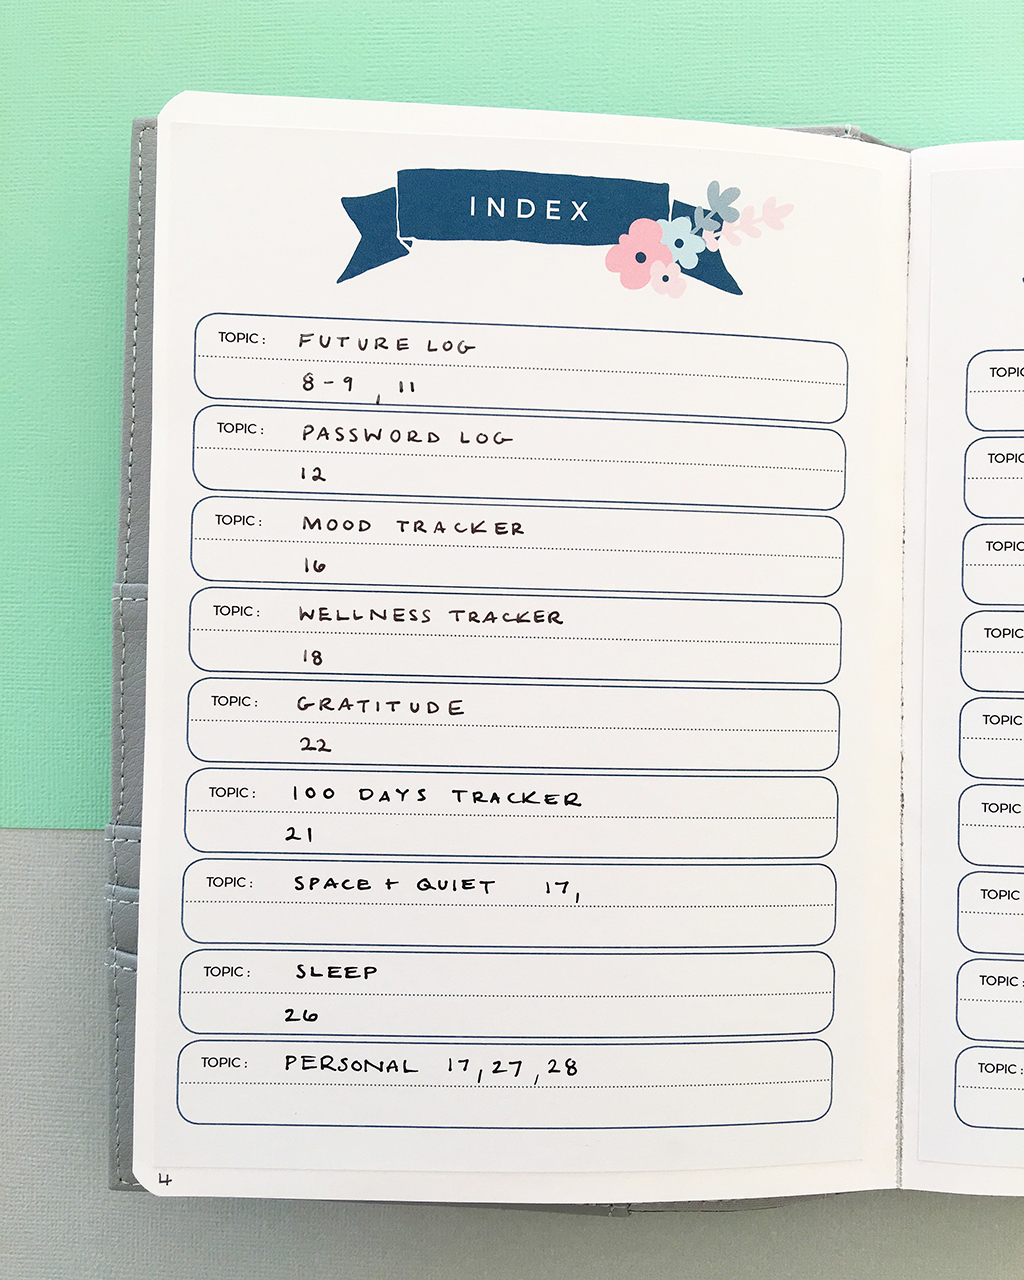 Index in my new bullet journal notebook